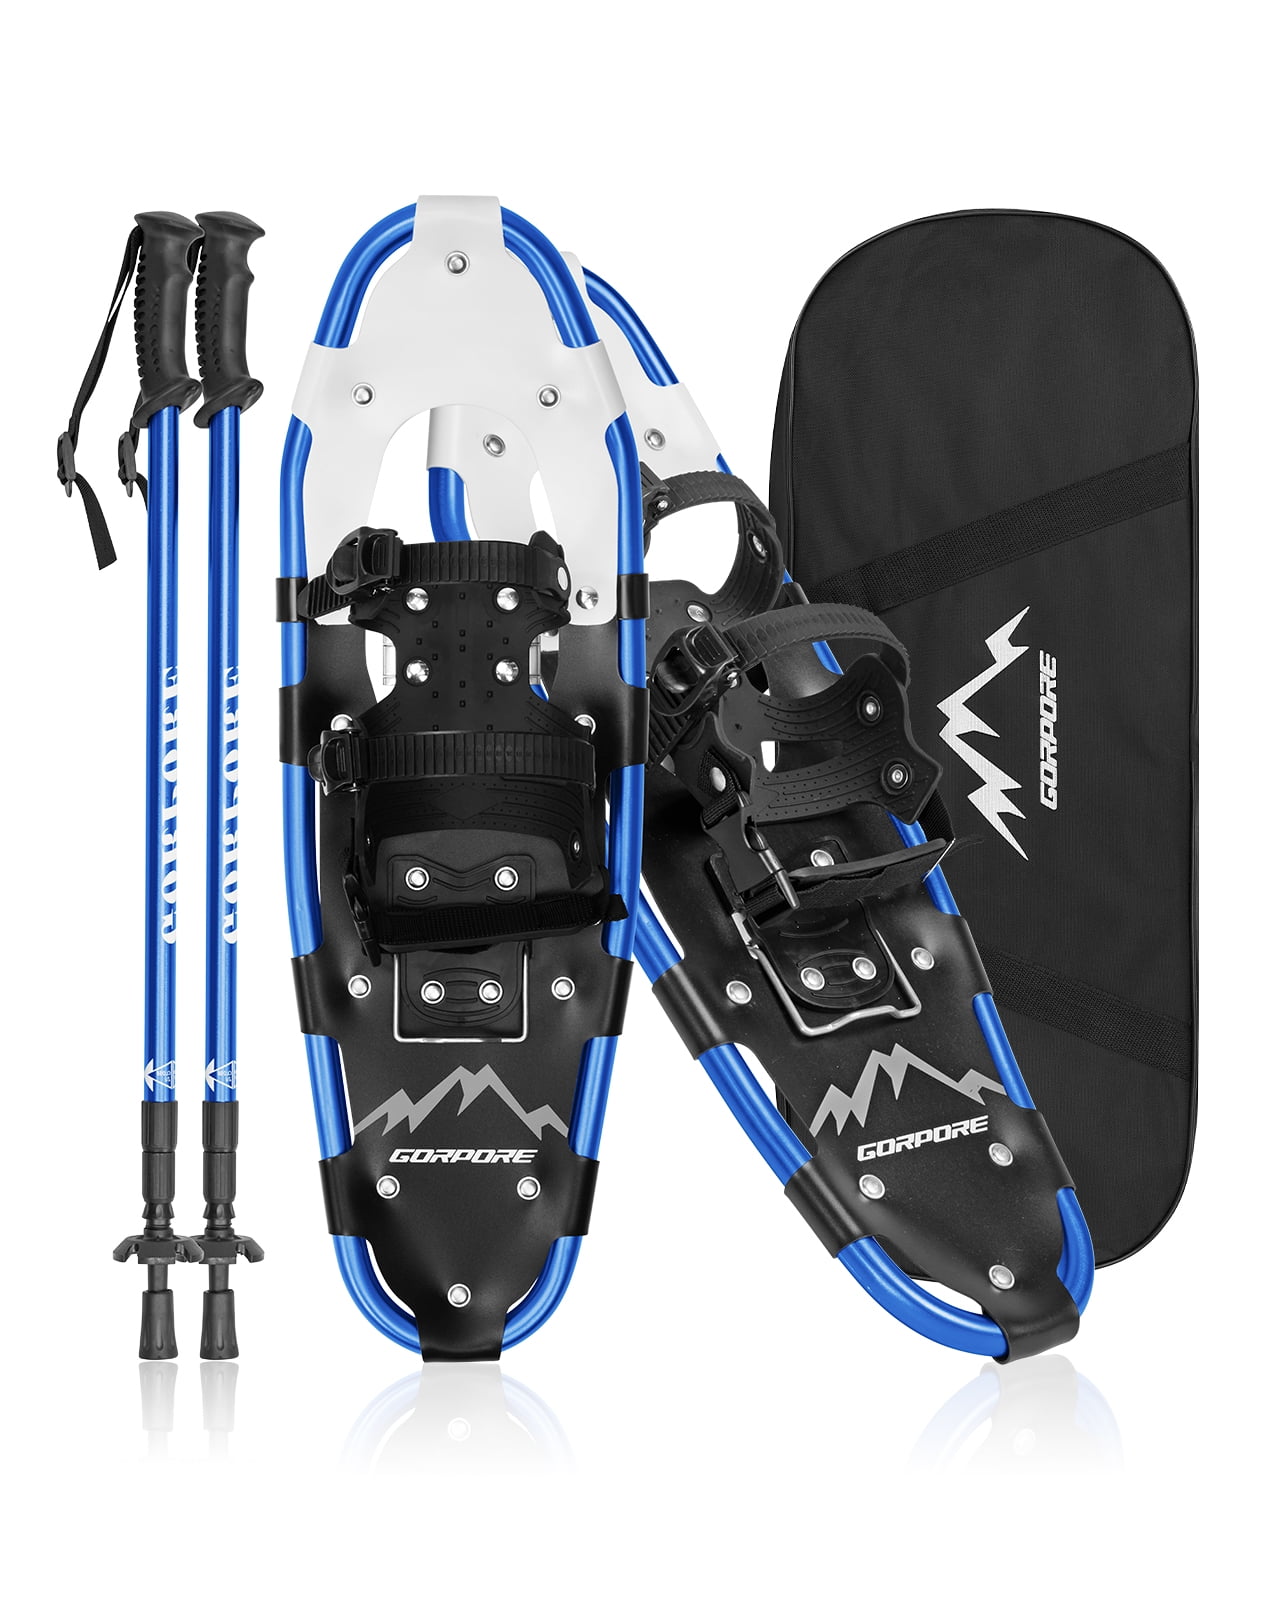 25inch Lightweight Aluminum All Terrain Snow Shoes for Adults Youth W/Bag 